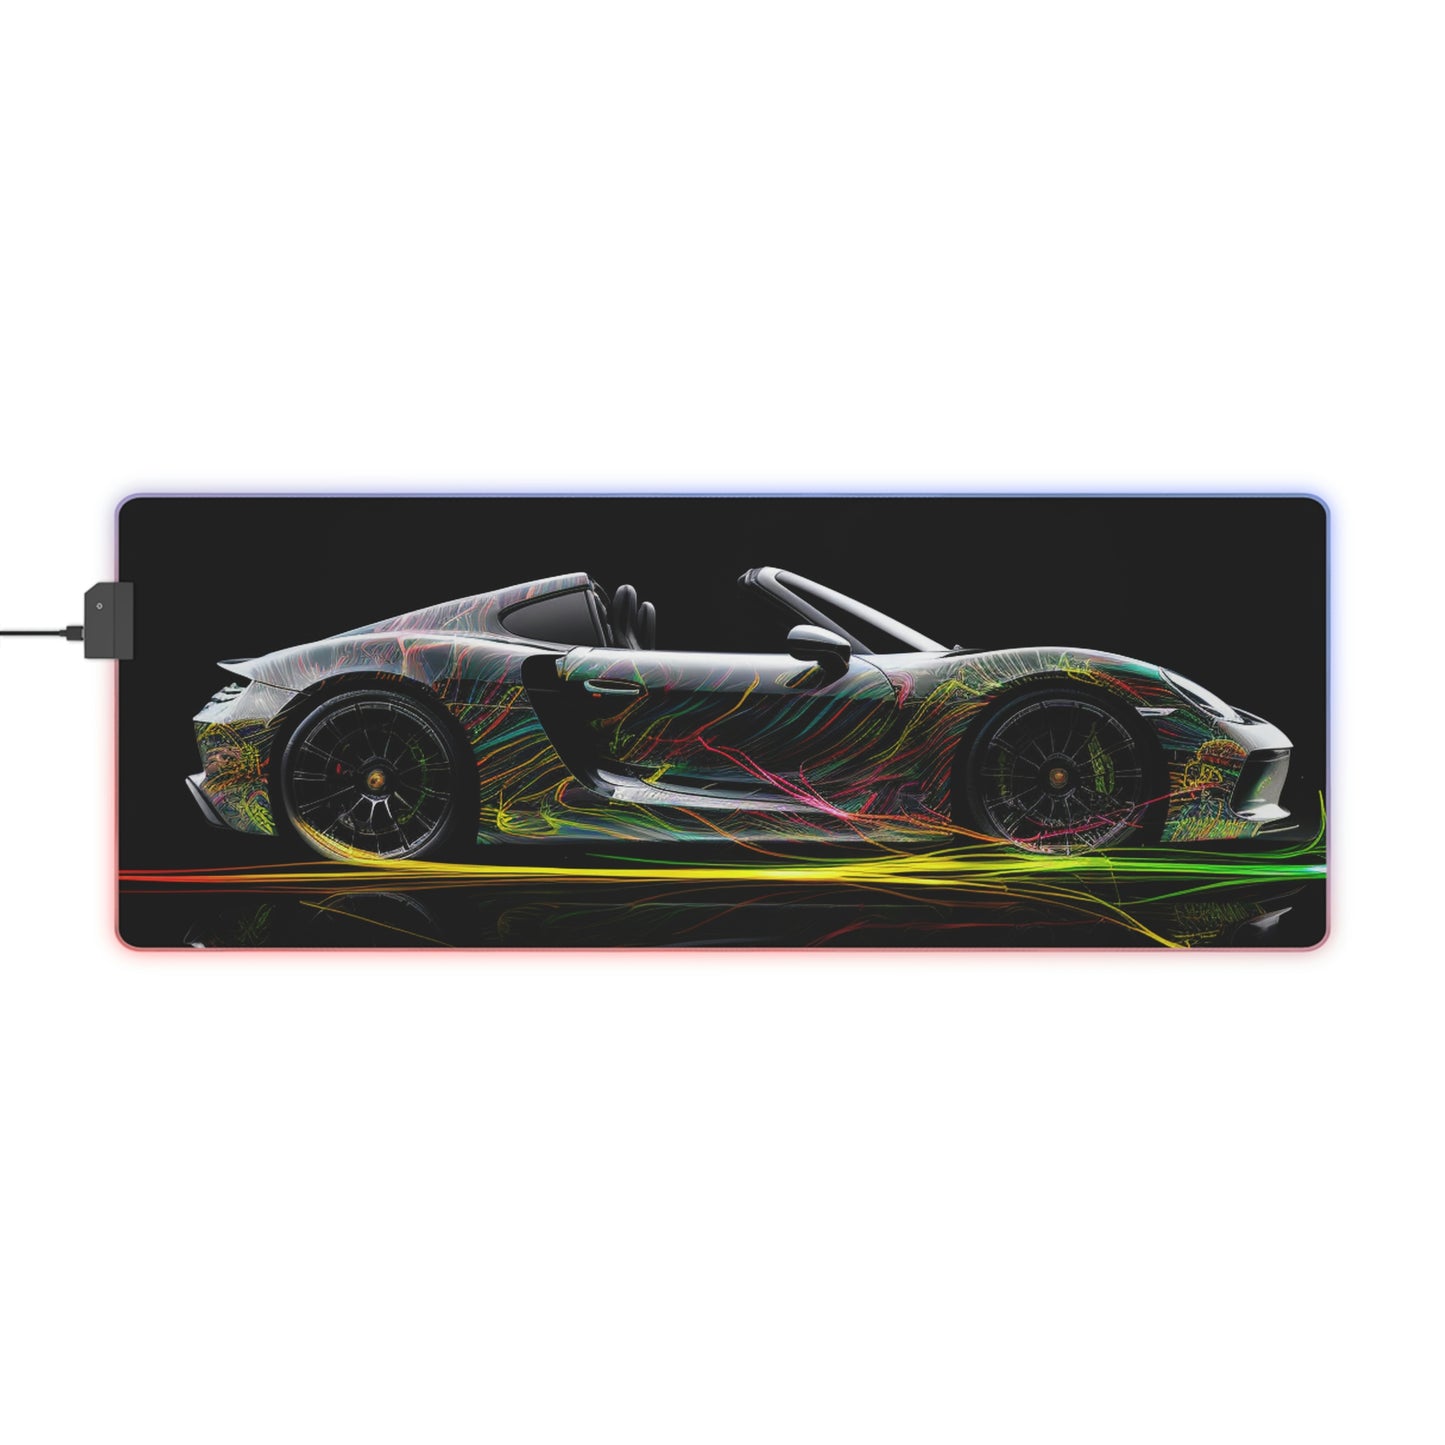 LED Gaming Mouse Pad Porsche Line 1